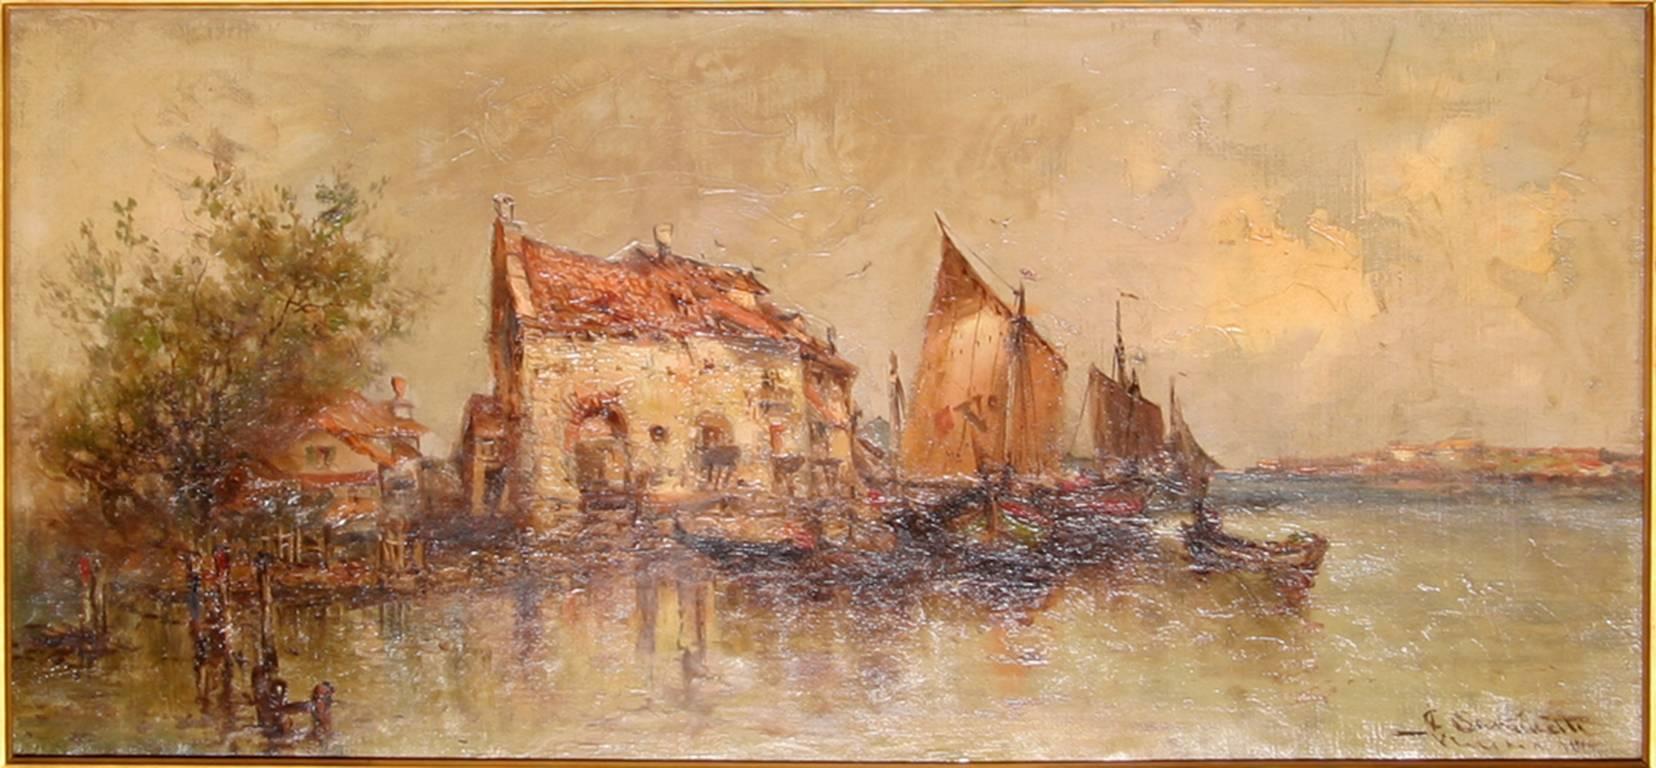 Sailboats in Venice - Painting by Santinetti